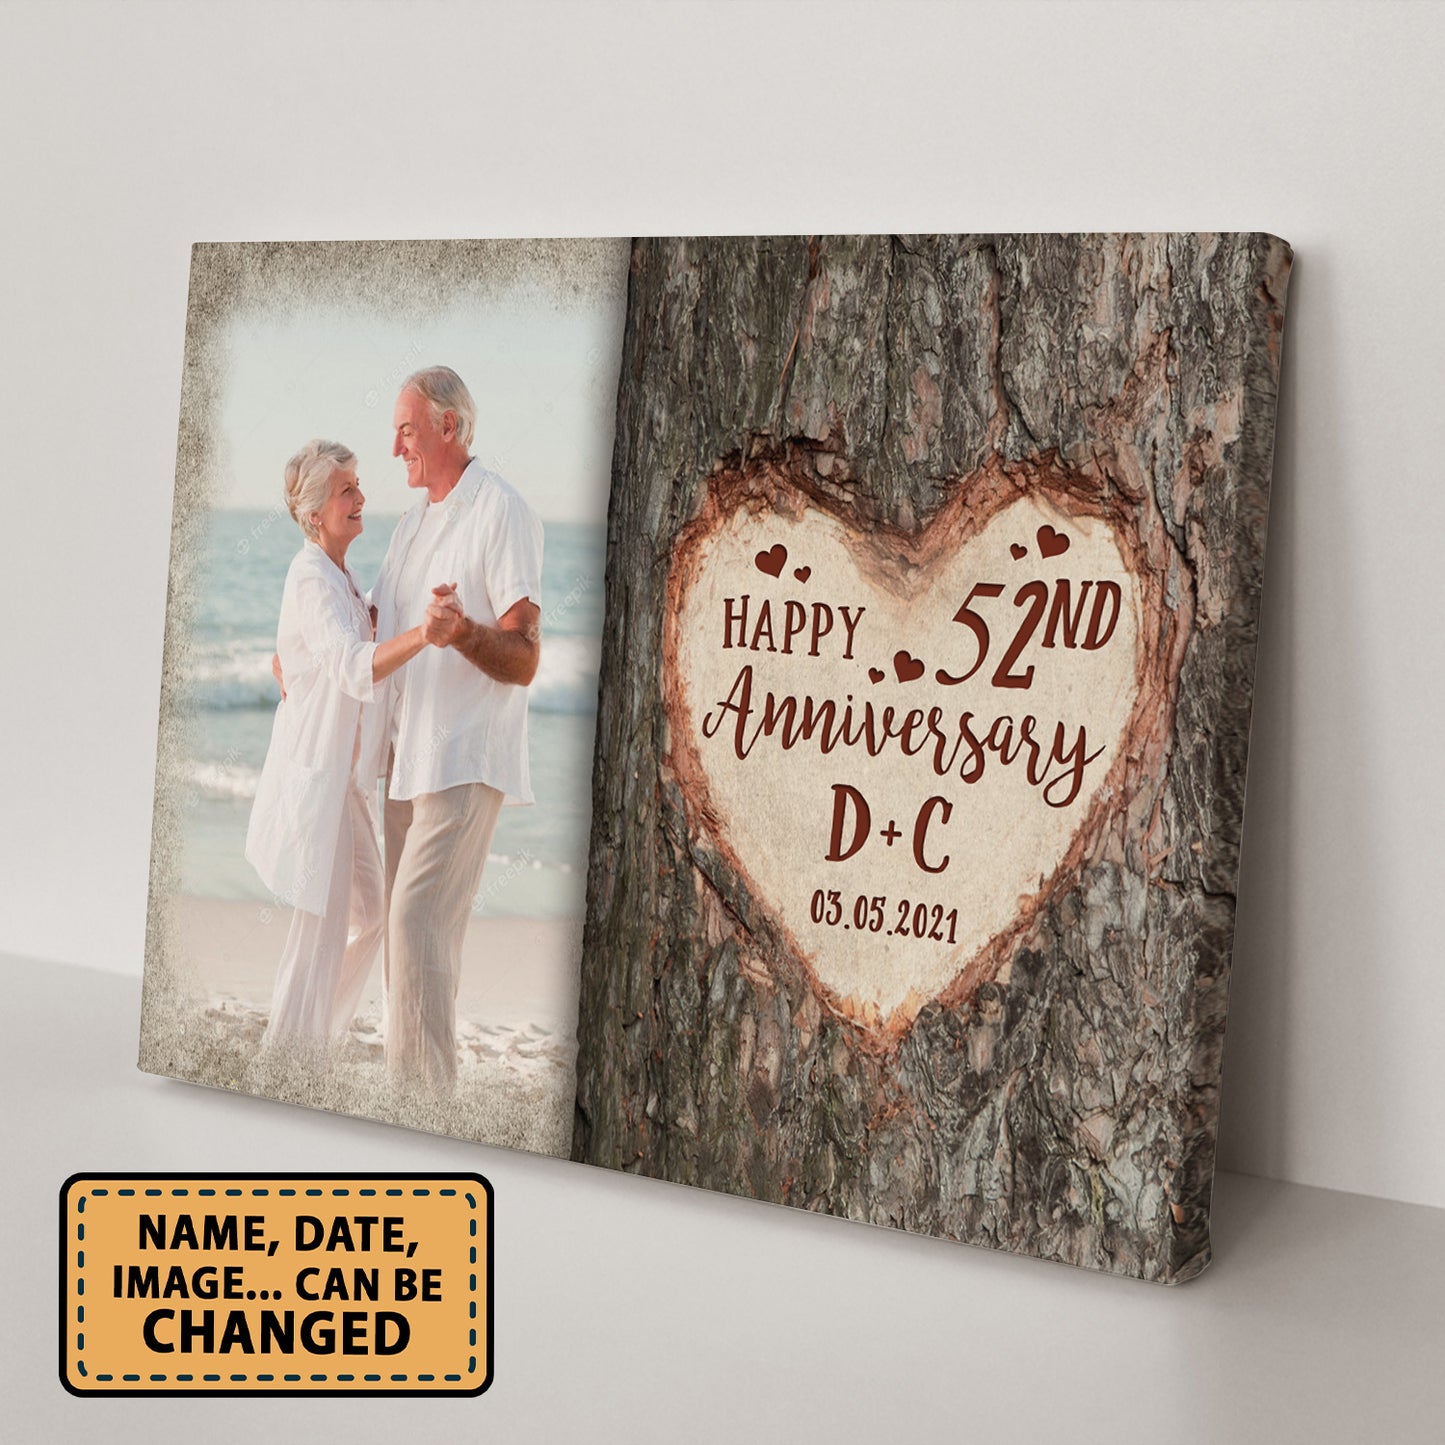 Happy 52nd Anniversary Tree Heart Custom Image Personalized Canvas